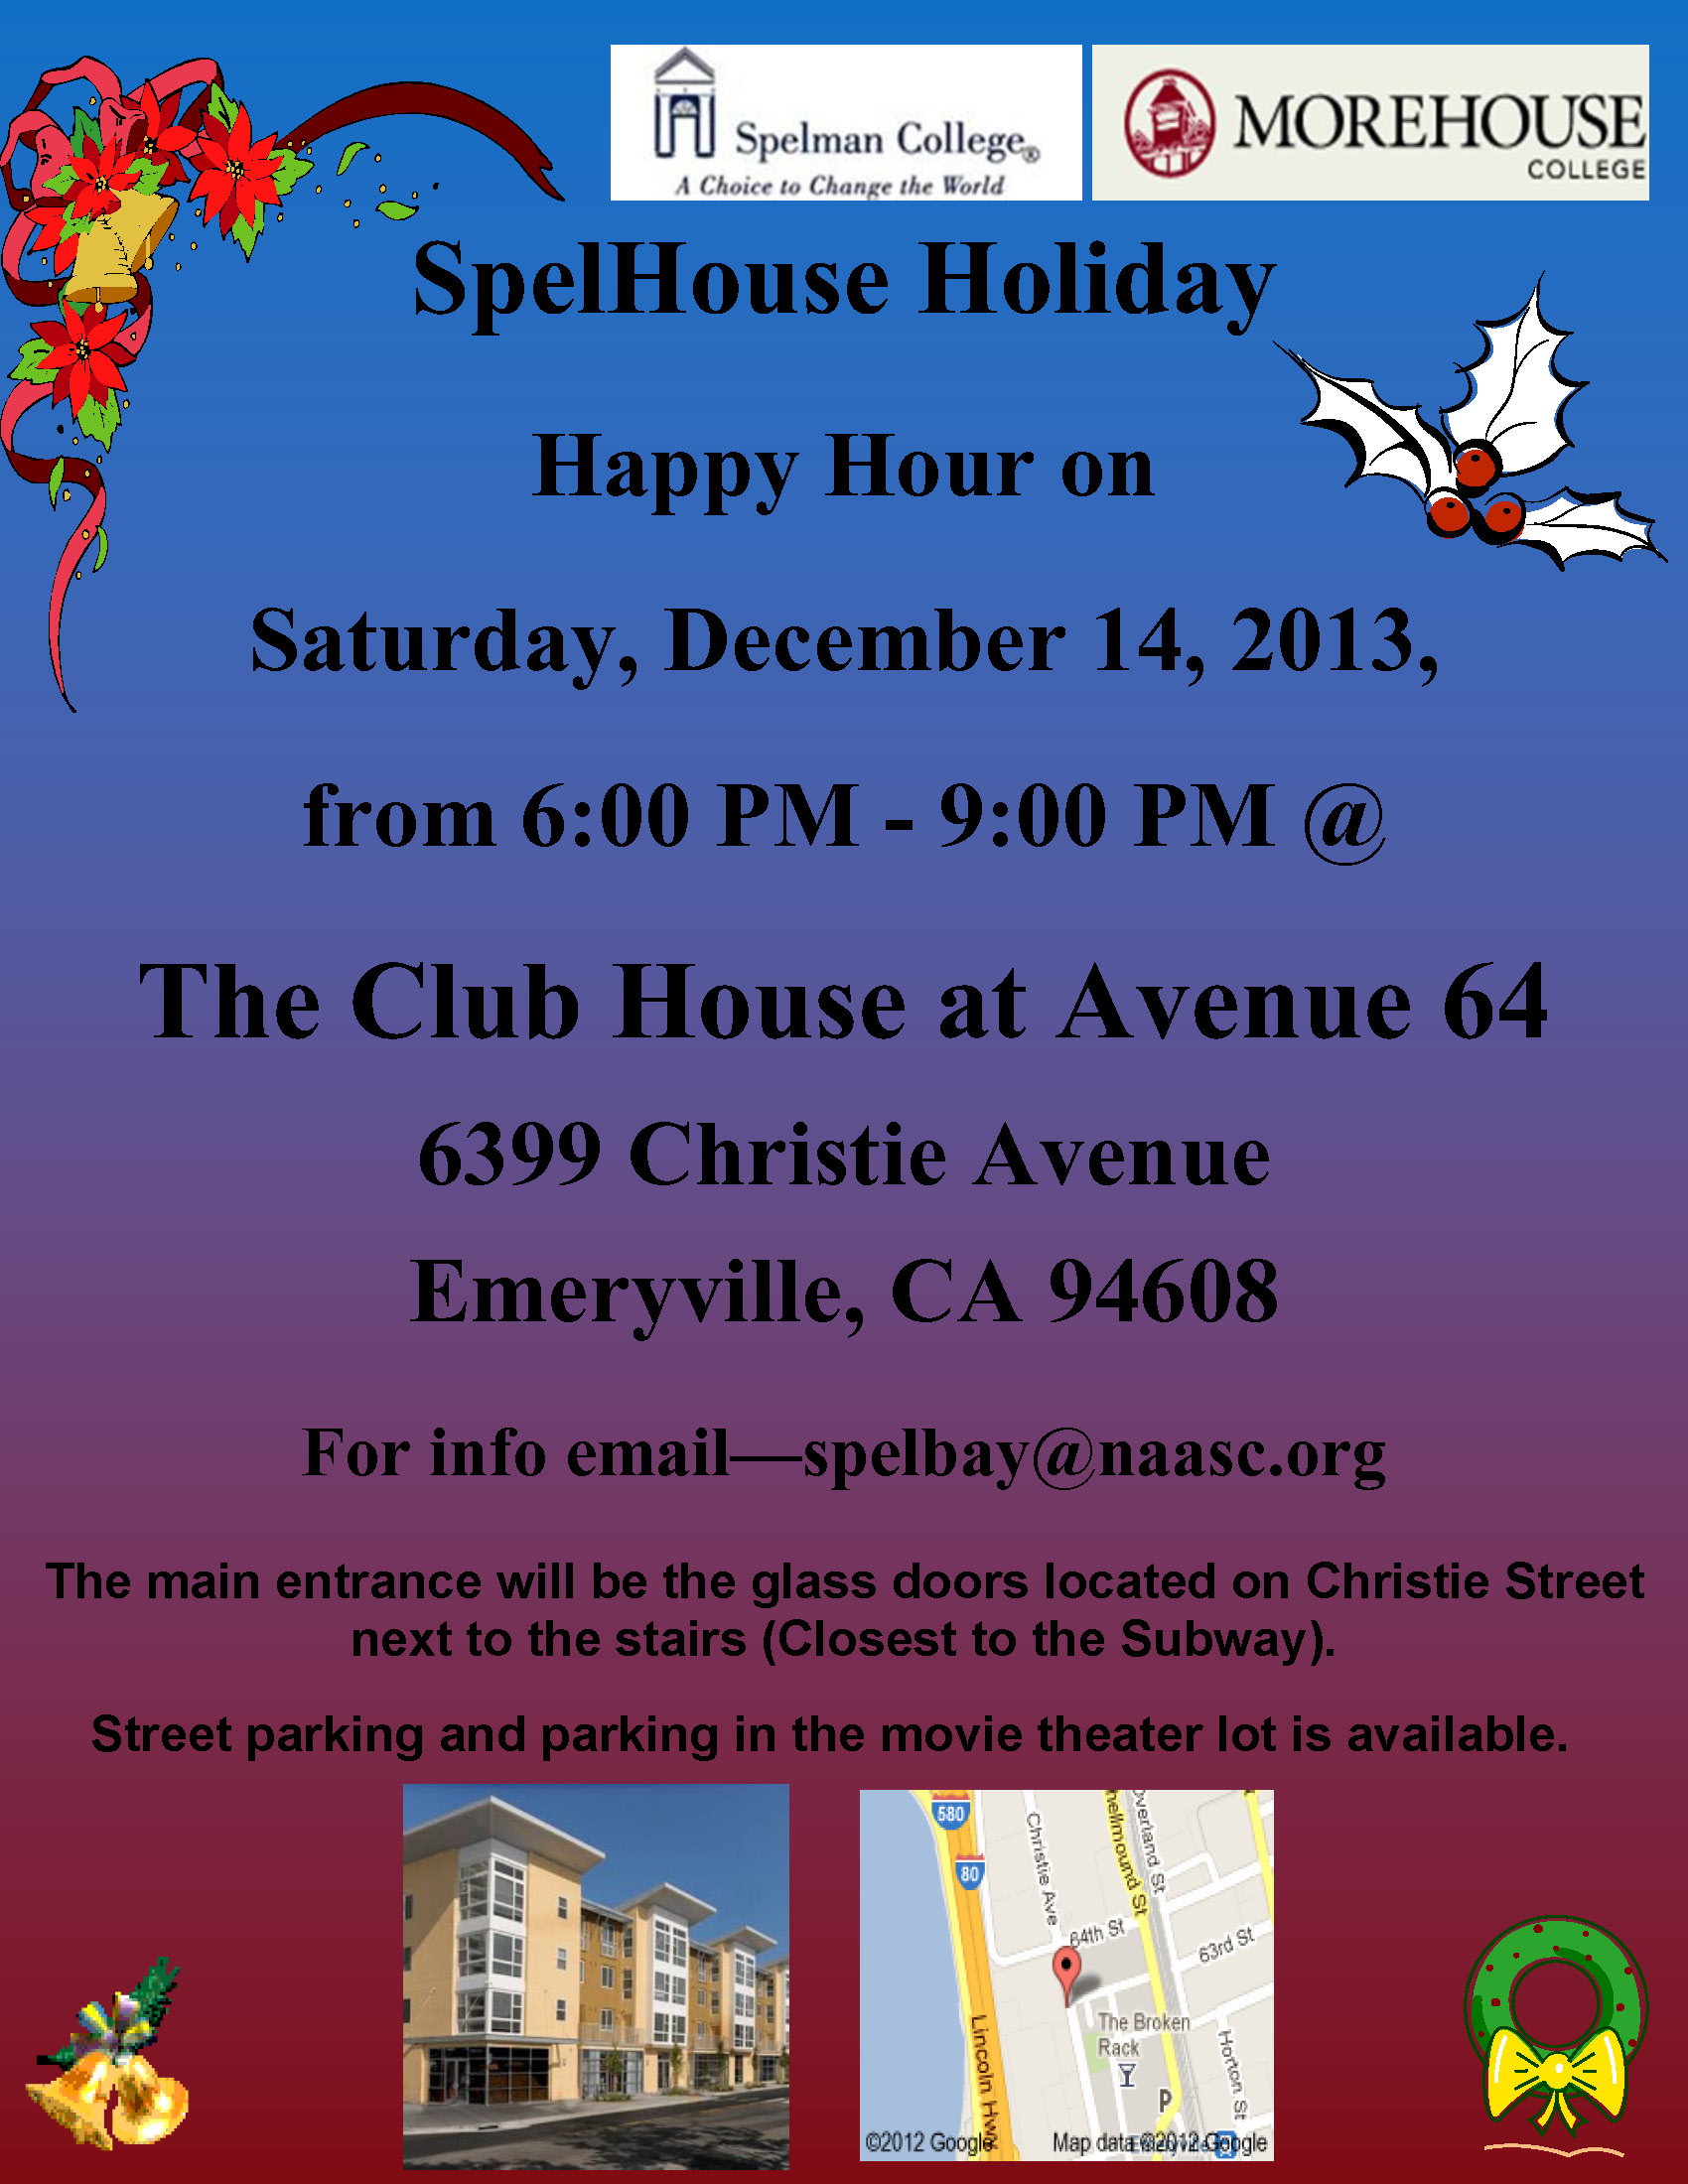 Spelman and Morehouse Alumni Association host Holiday event on December 12th